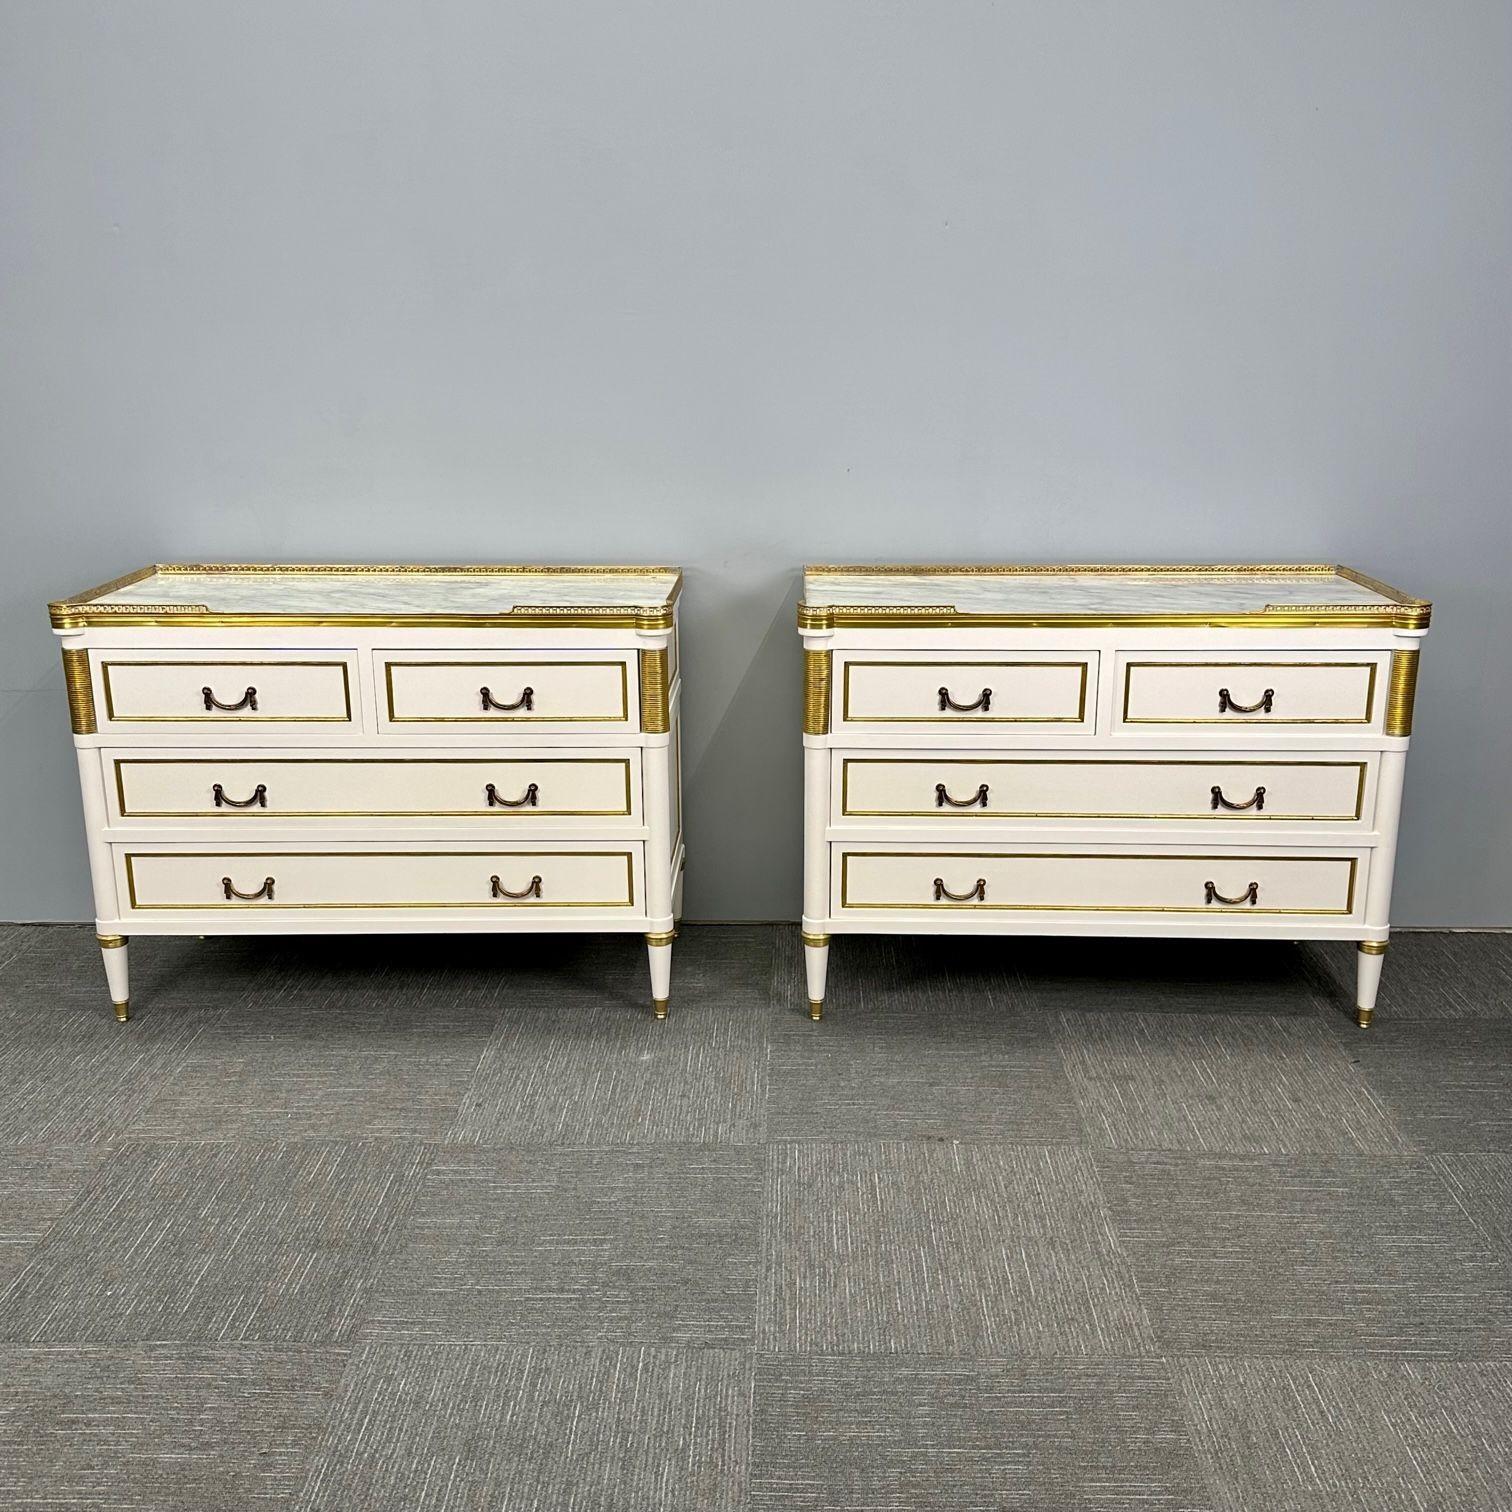 Louis XVI Hollywood Regency Maison Jansen Style White Commodes / Nightstands or Chests
 
Stunning pair of Marble Top Hollywood Regency Style Commodes or Chests. Each having two drawers over two larger drawers under a pierced bronze galleried framed